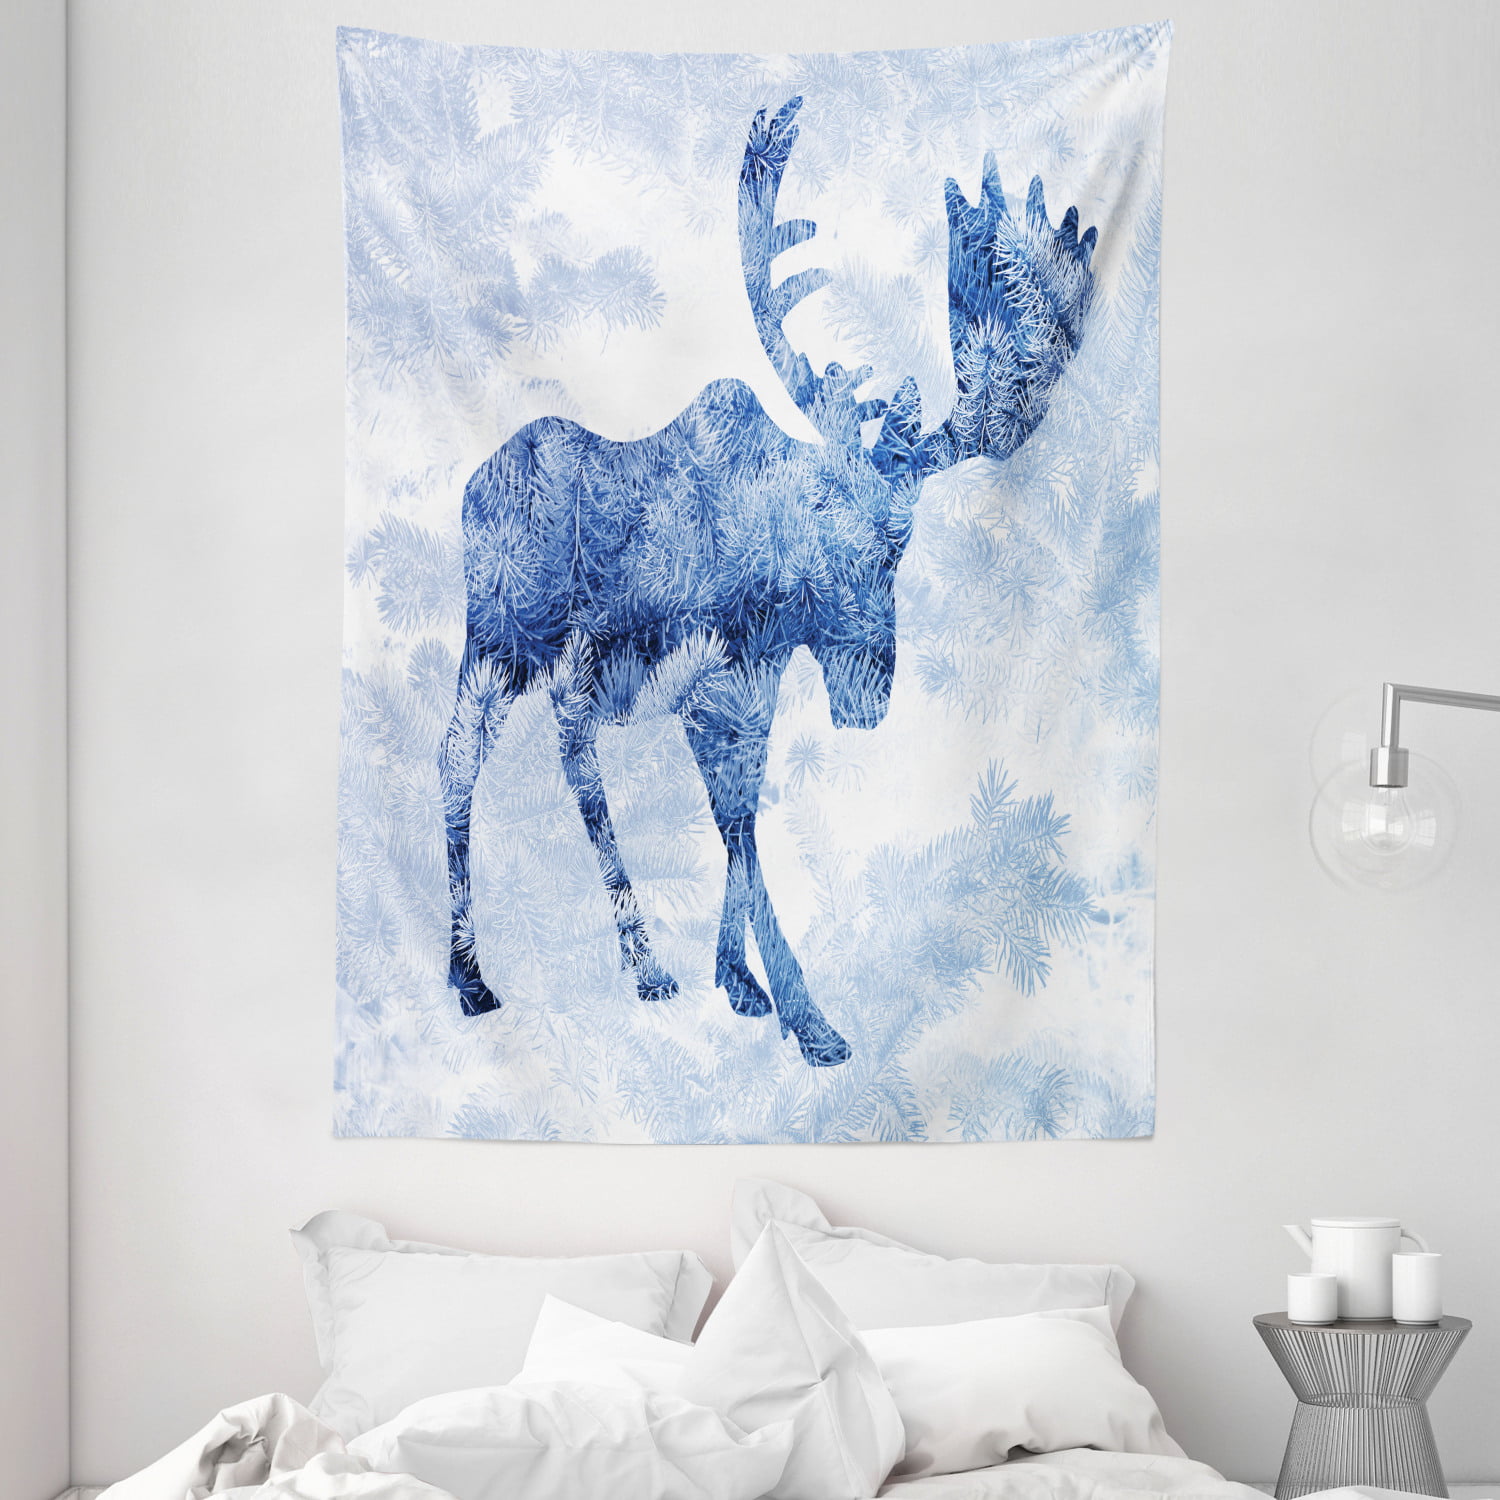 Snow Forest Pattern Tapestry New Room Wall Hanging Decor Art Tree Deer Tapestry 